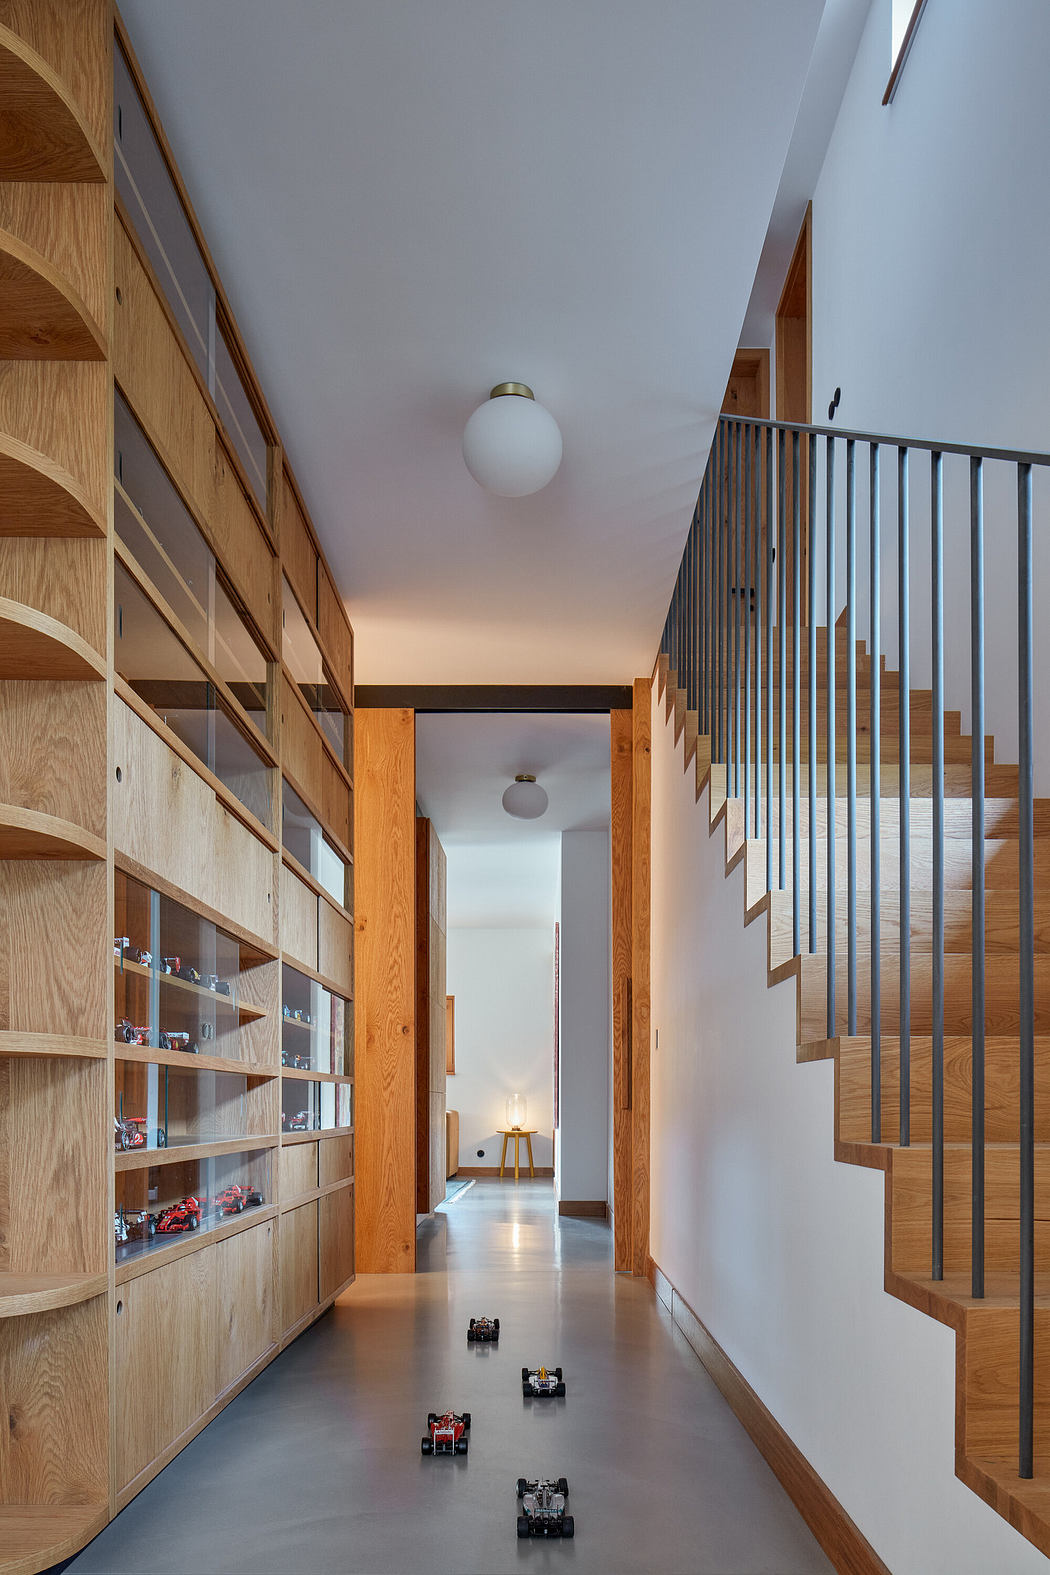 Modern hallway with wooden shelves, staircase railing, and toy cars on the floor.